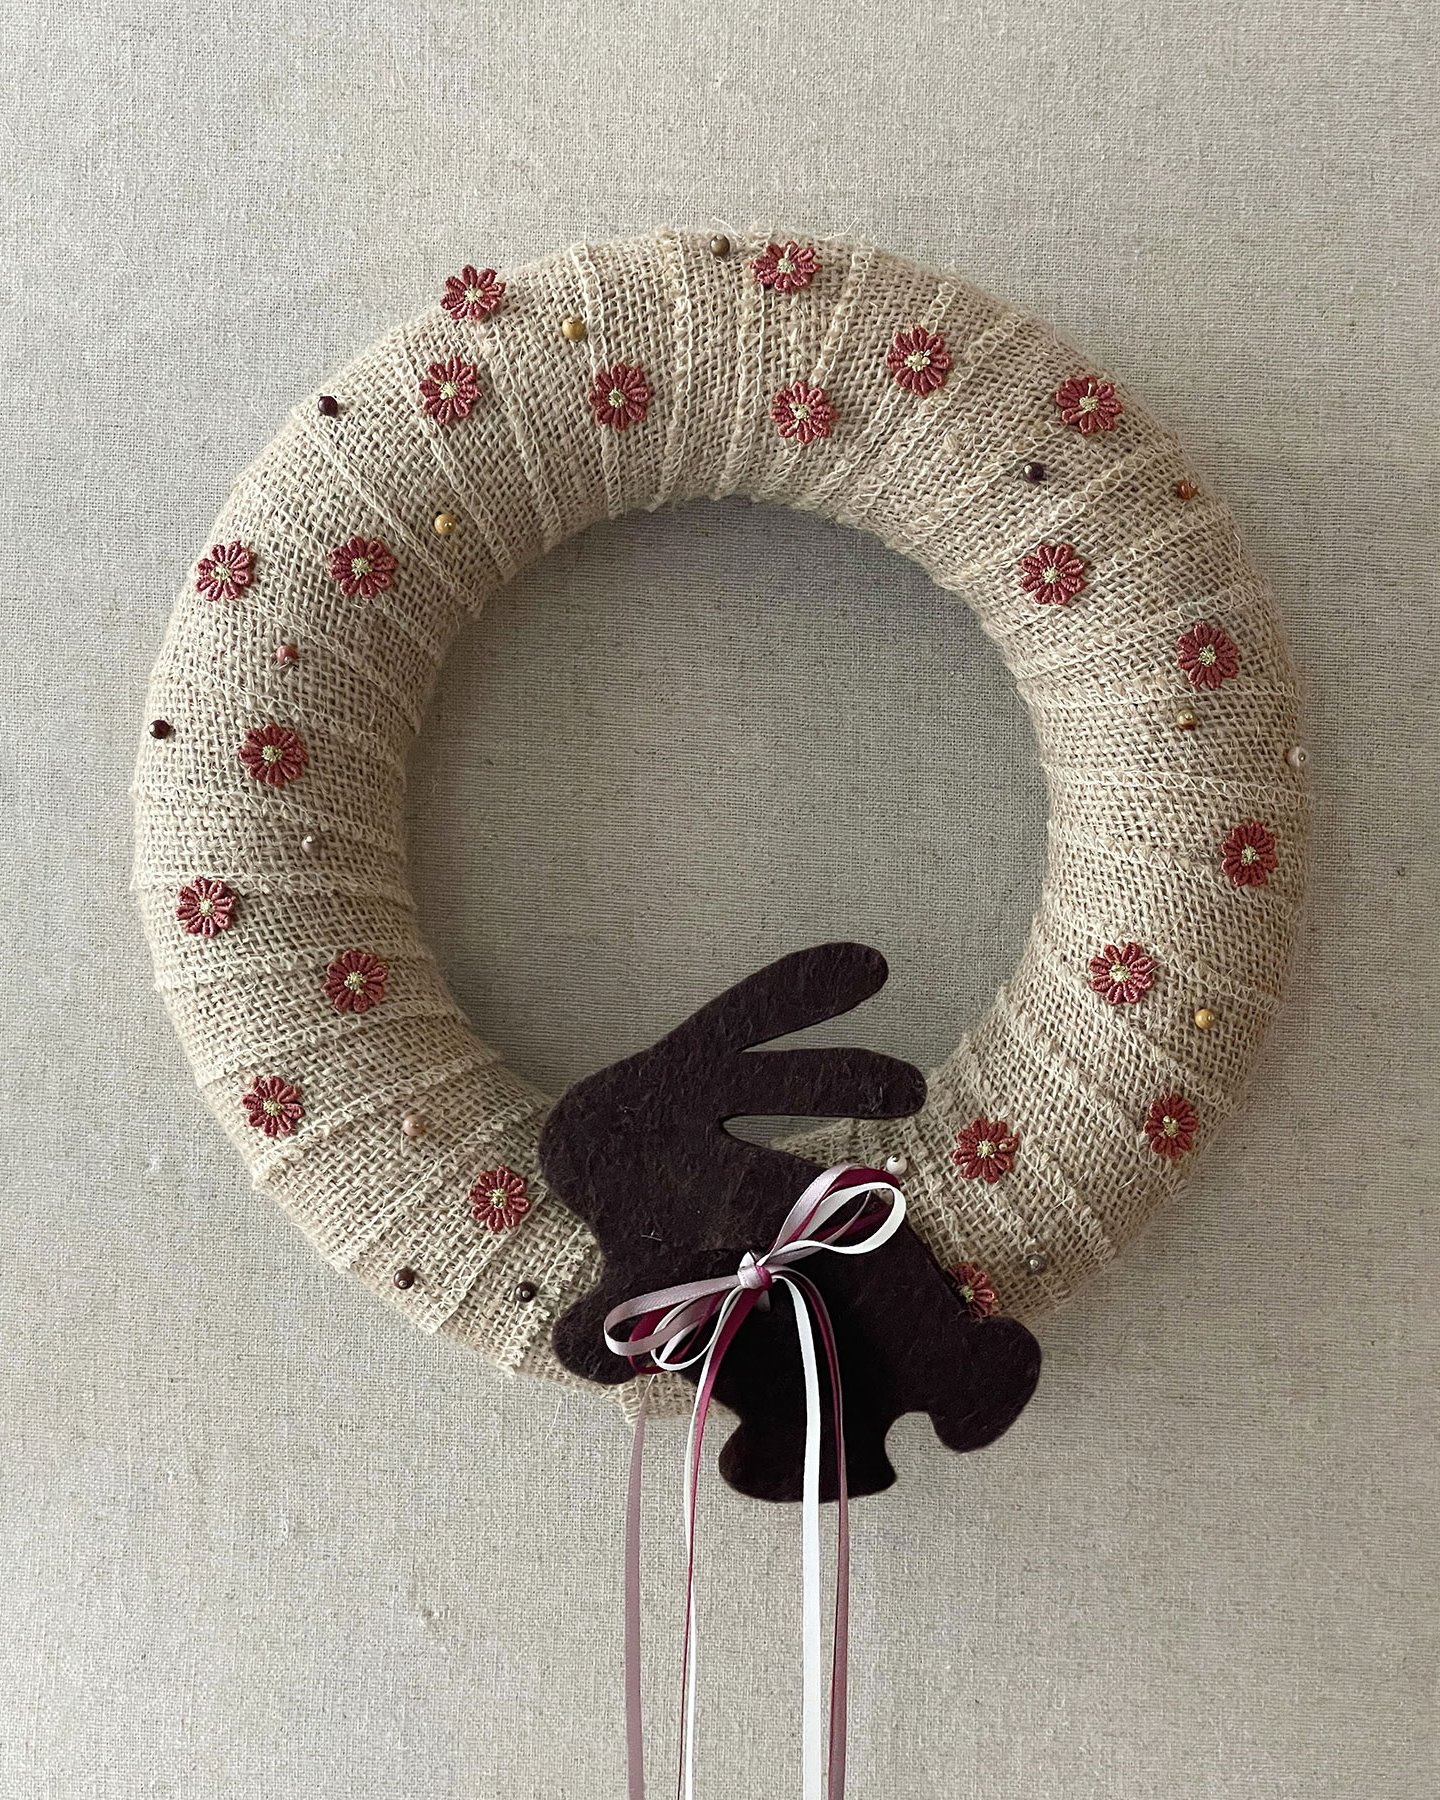 DIY: Jute-wrapped Easter wreath with bunny DIY4311-Image.jpg